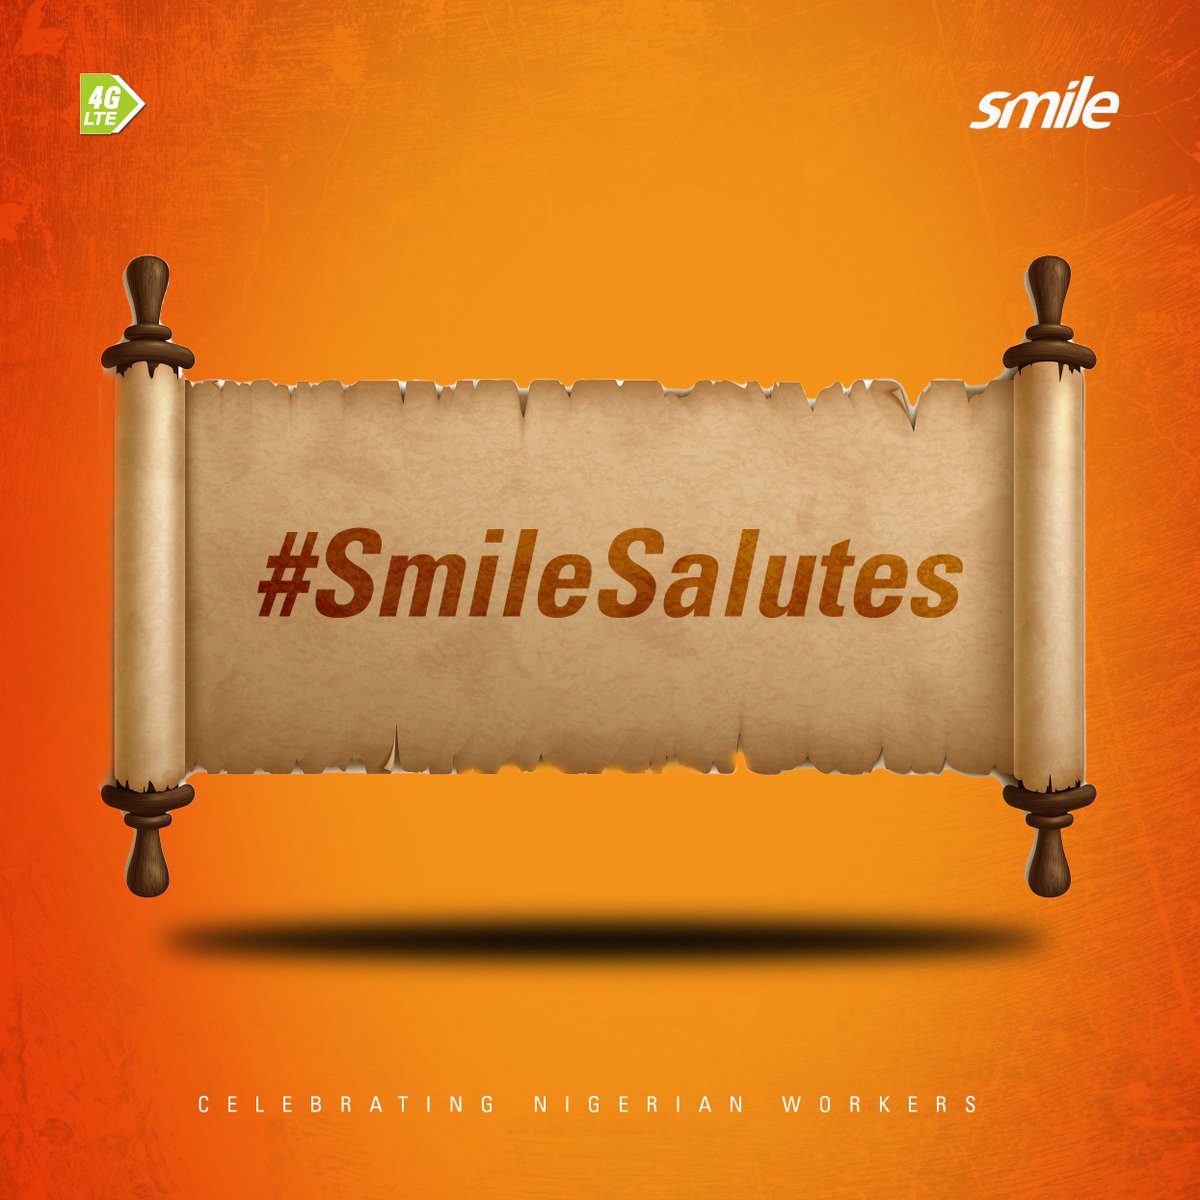 We identify, appreciate and doff our hats to all of you putting in the work in various fields. Smile Salutes. Smile #Smile #Salute #WorkersDay